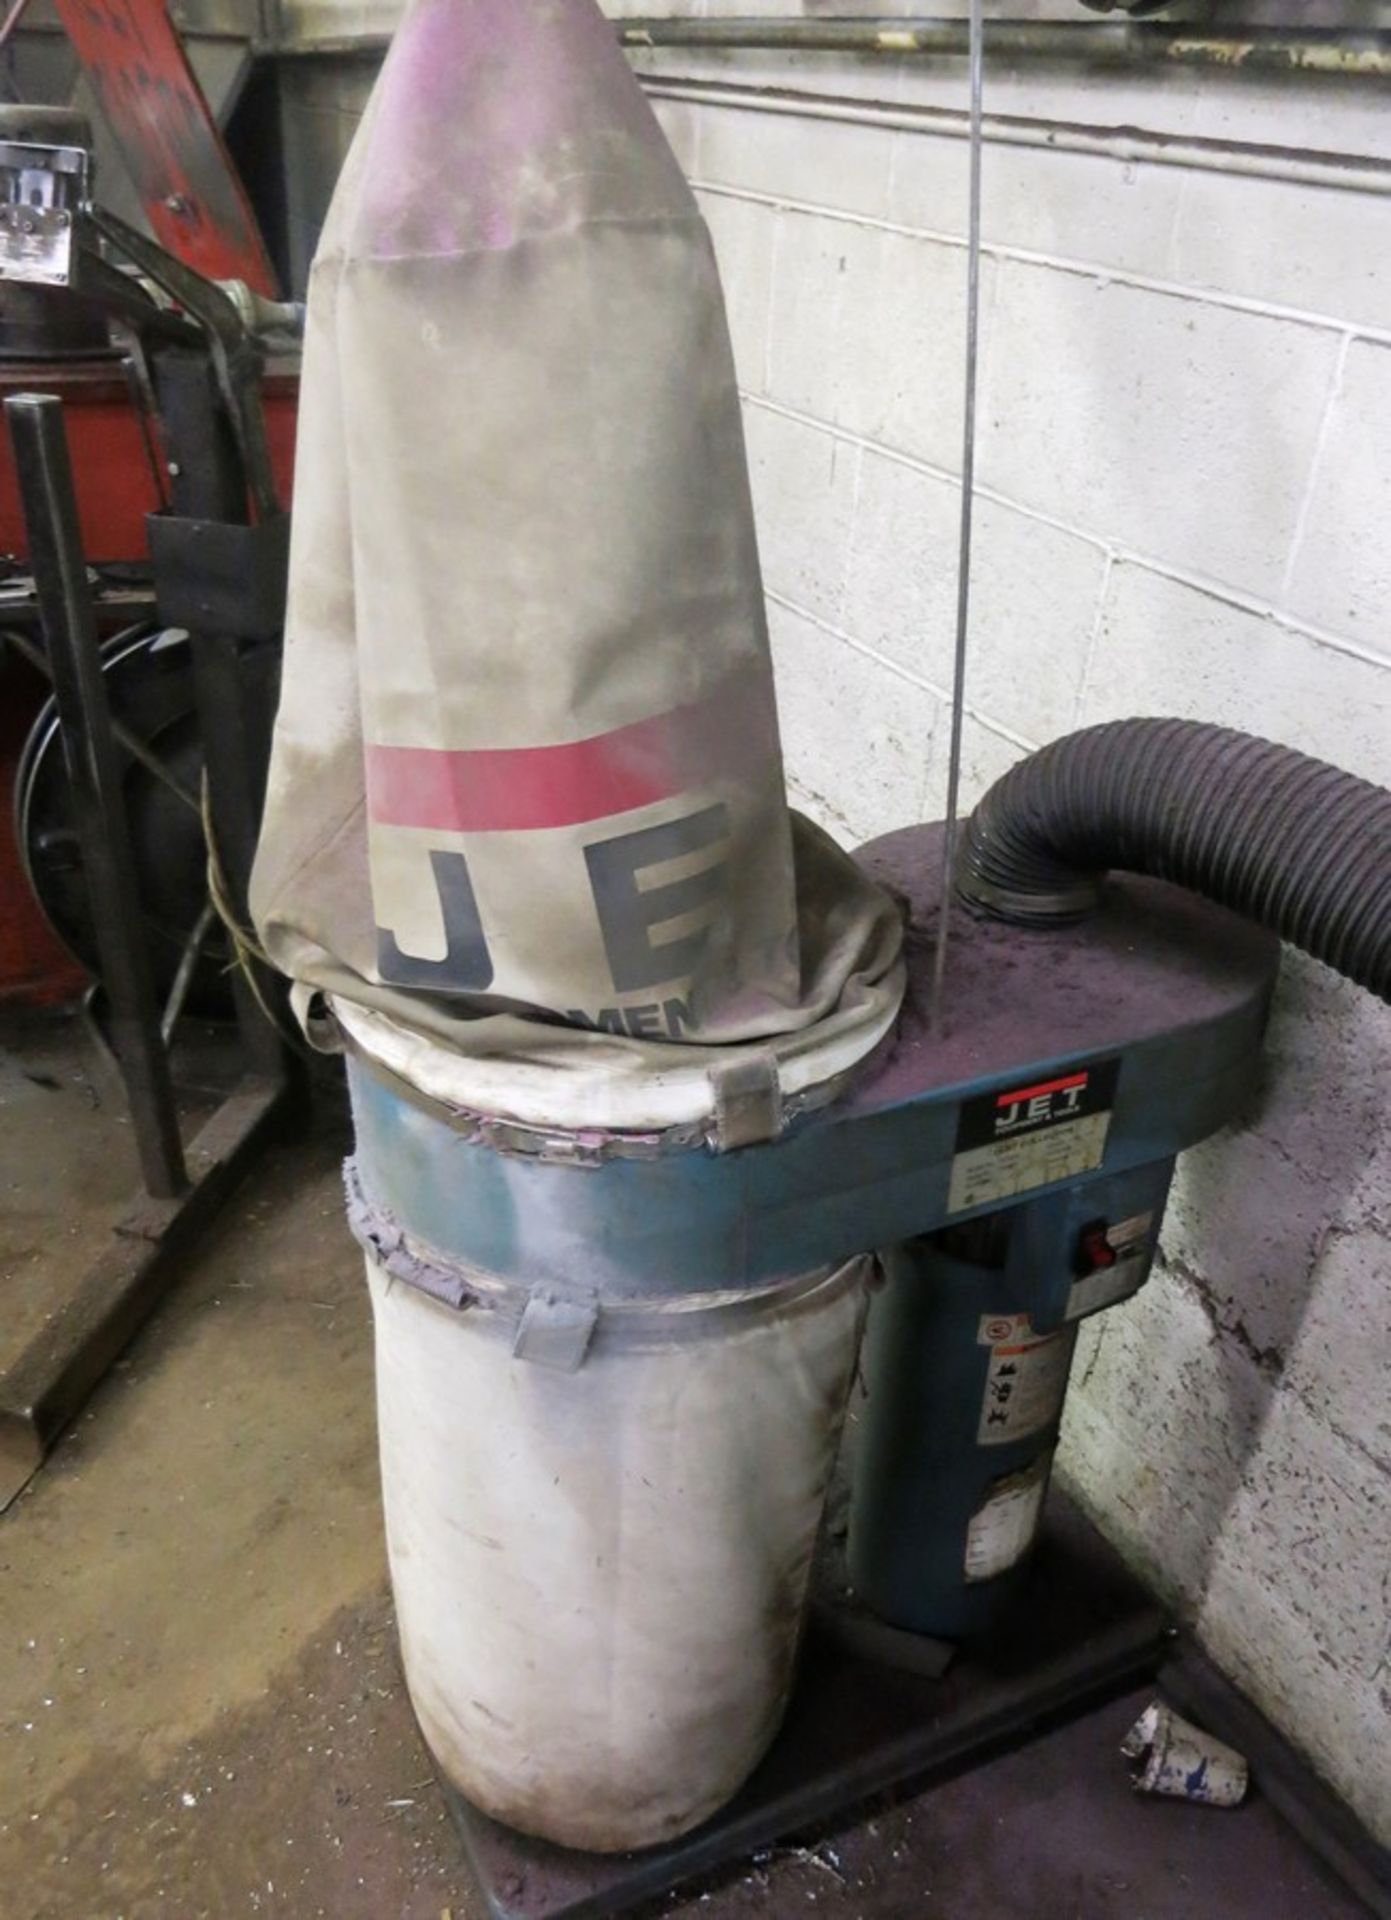 BOYER SCHULTZ 6"X12" SURFACE GRINDER With Jet Dust Collector - Image 3 of 3